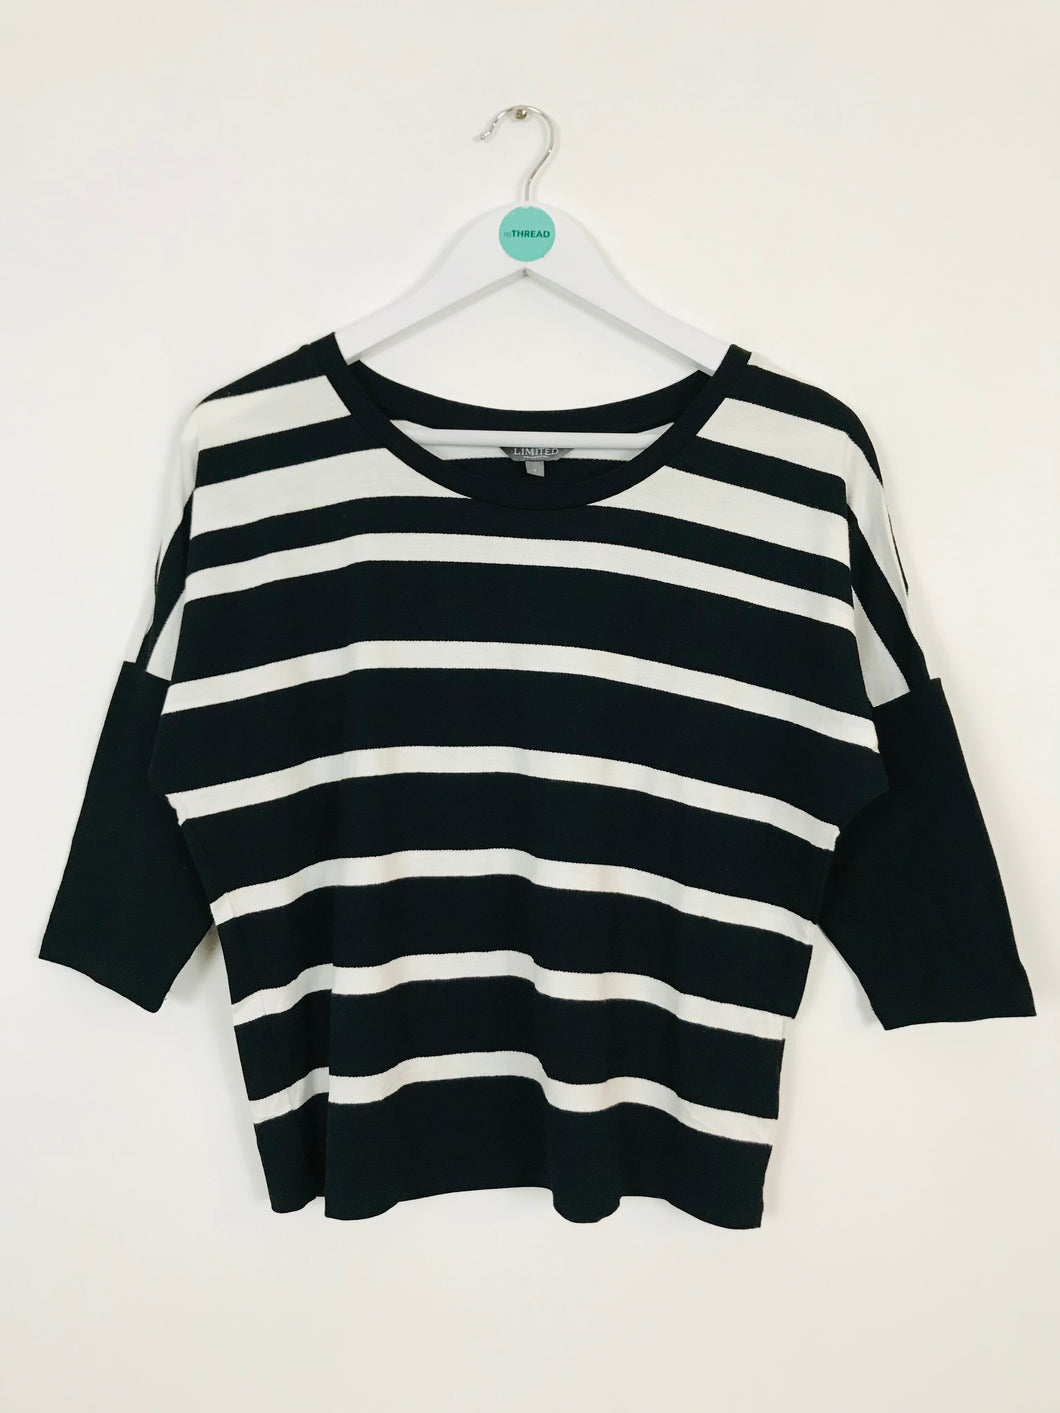 Limited Collection Women’s Stripe 3/4 Length Sleeve Tshirt | UK 8 | Black and White